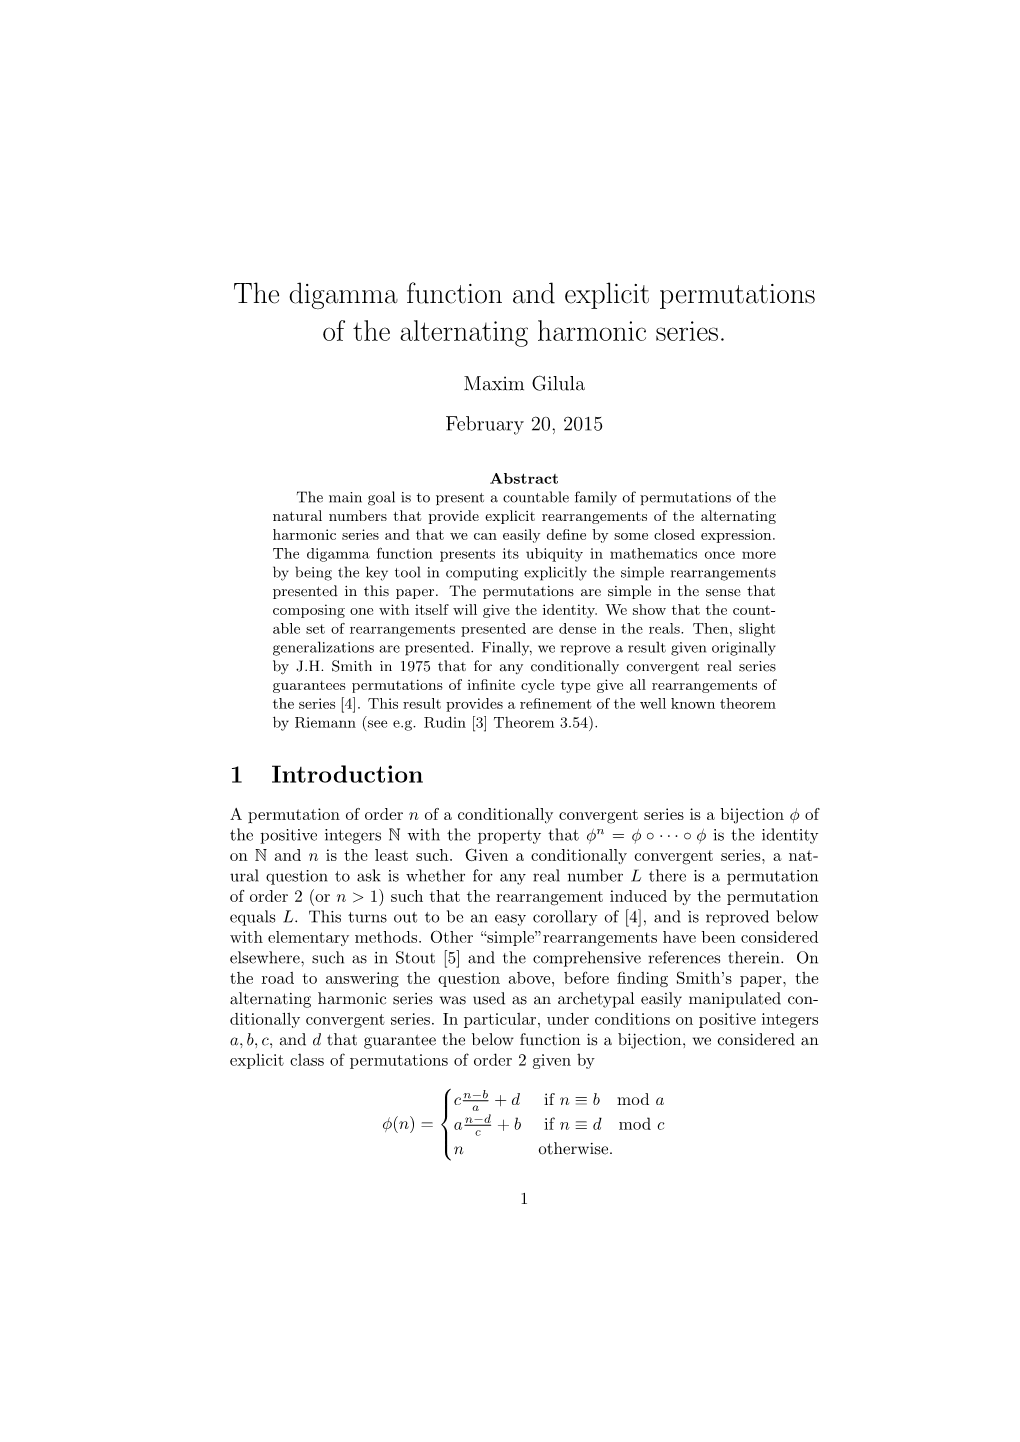 The Digamma Function and Explicit Permutations of the Alternating Harmonic Series